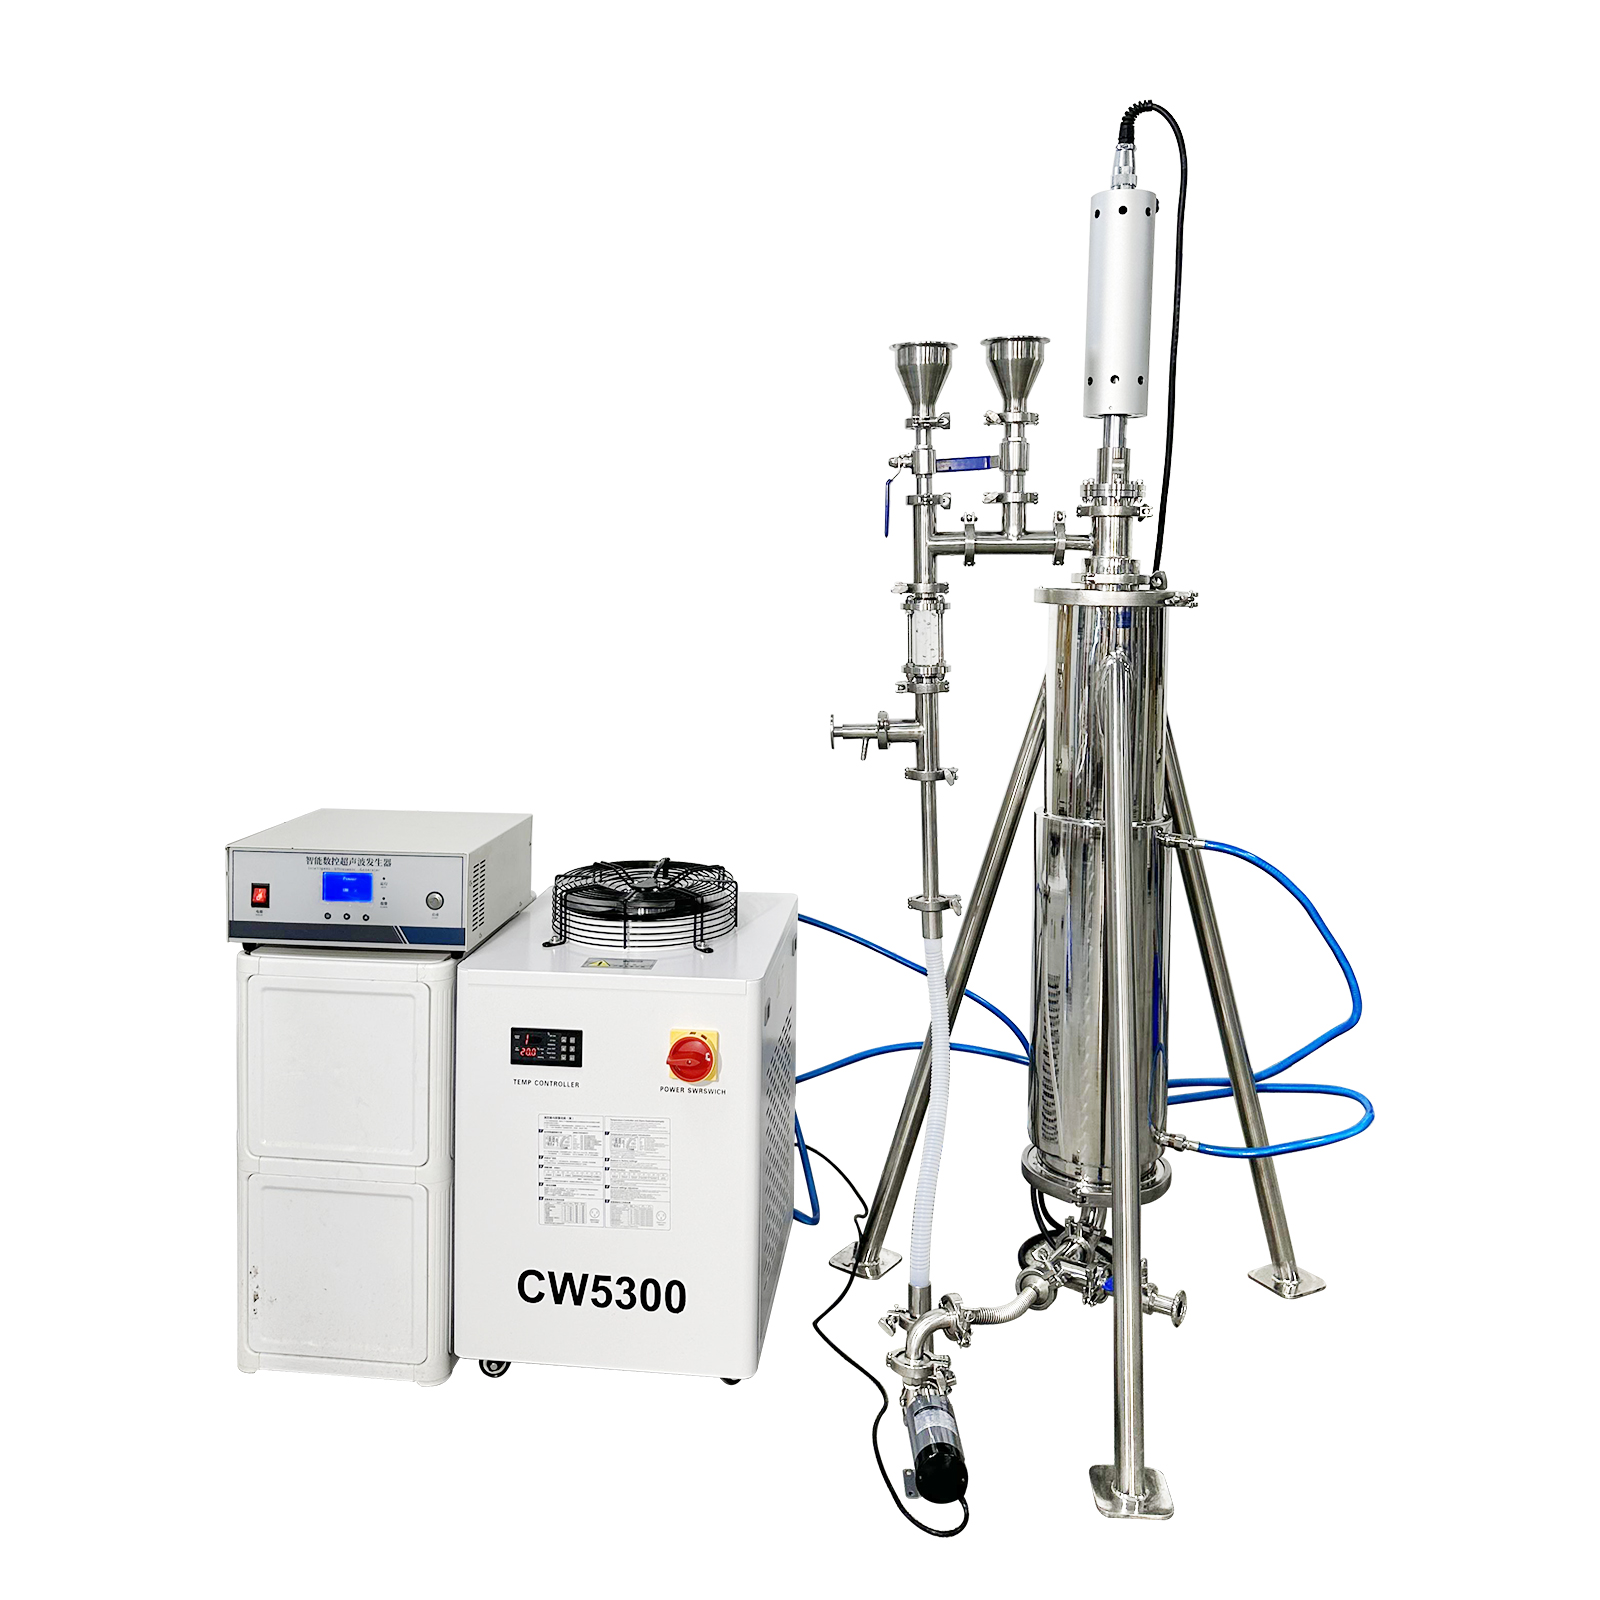 How to use ultrasonic extraction equipment?